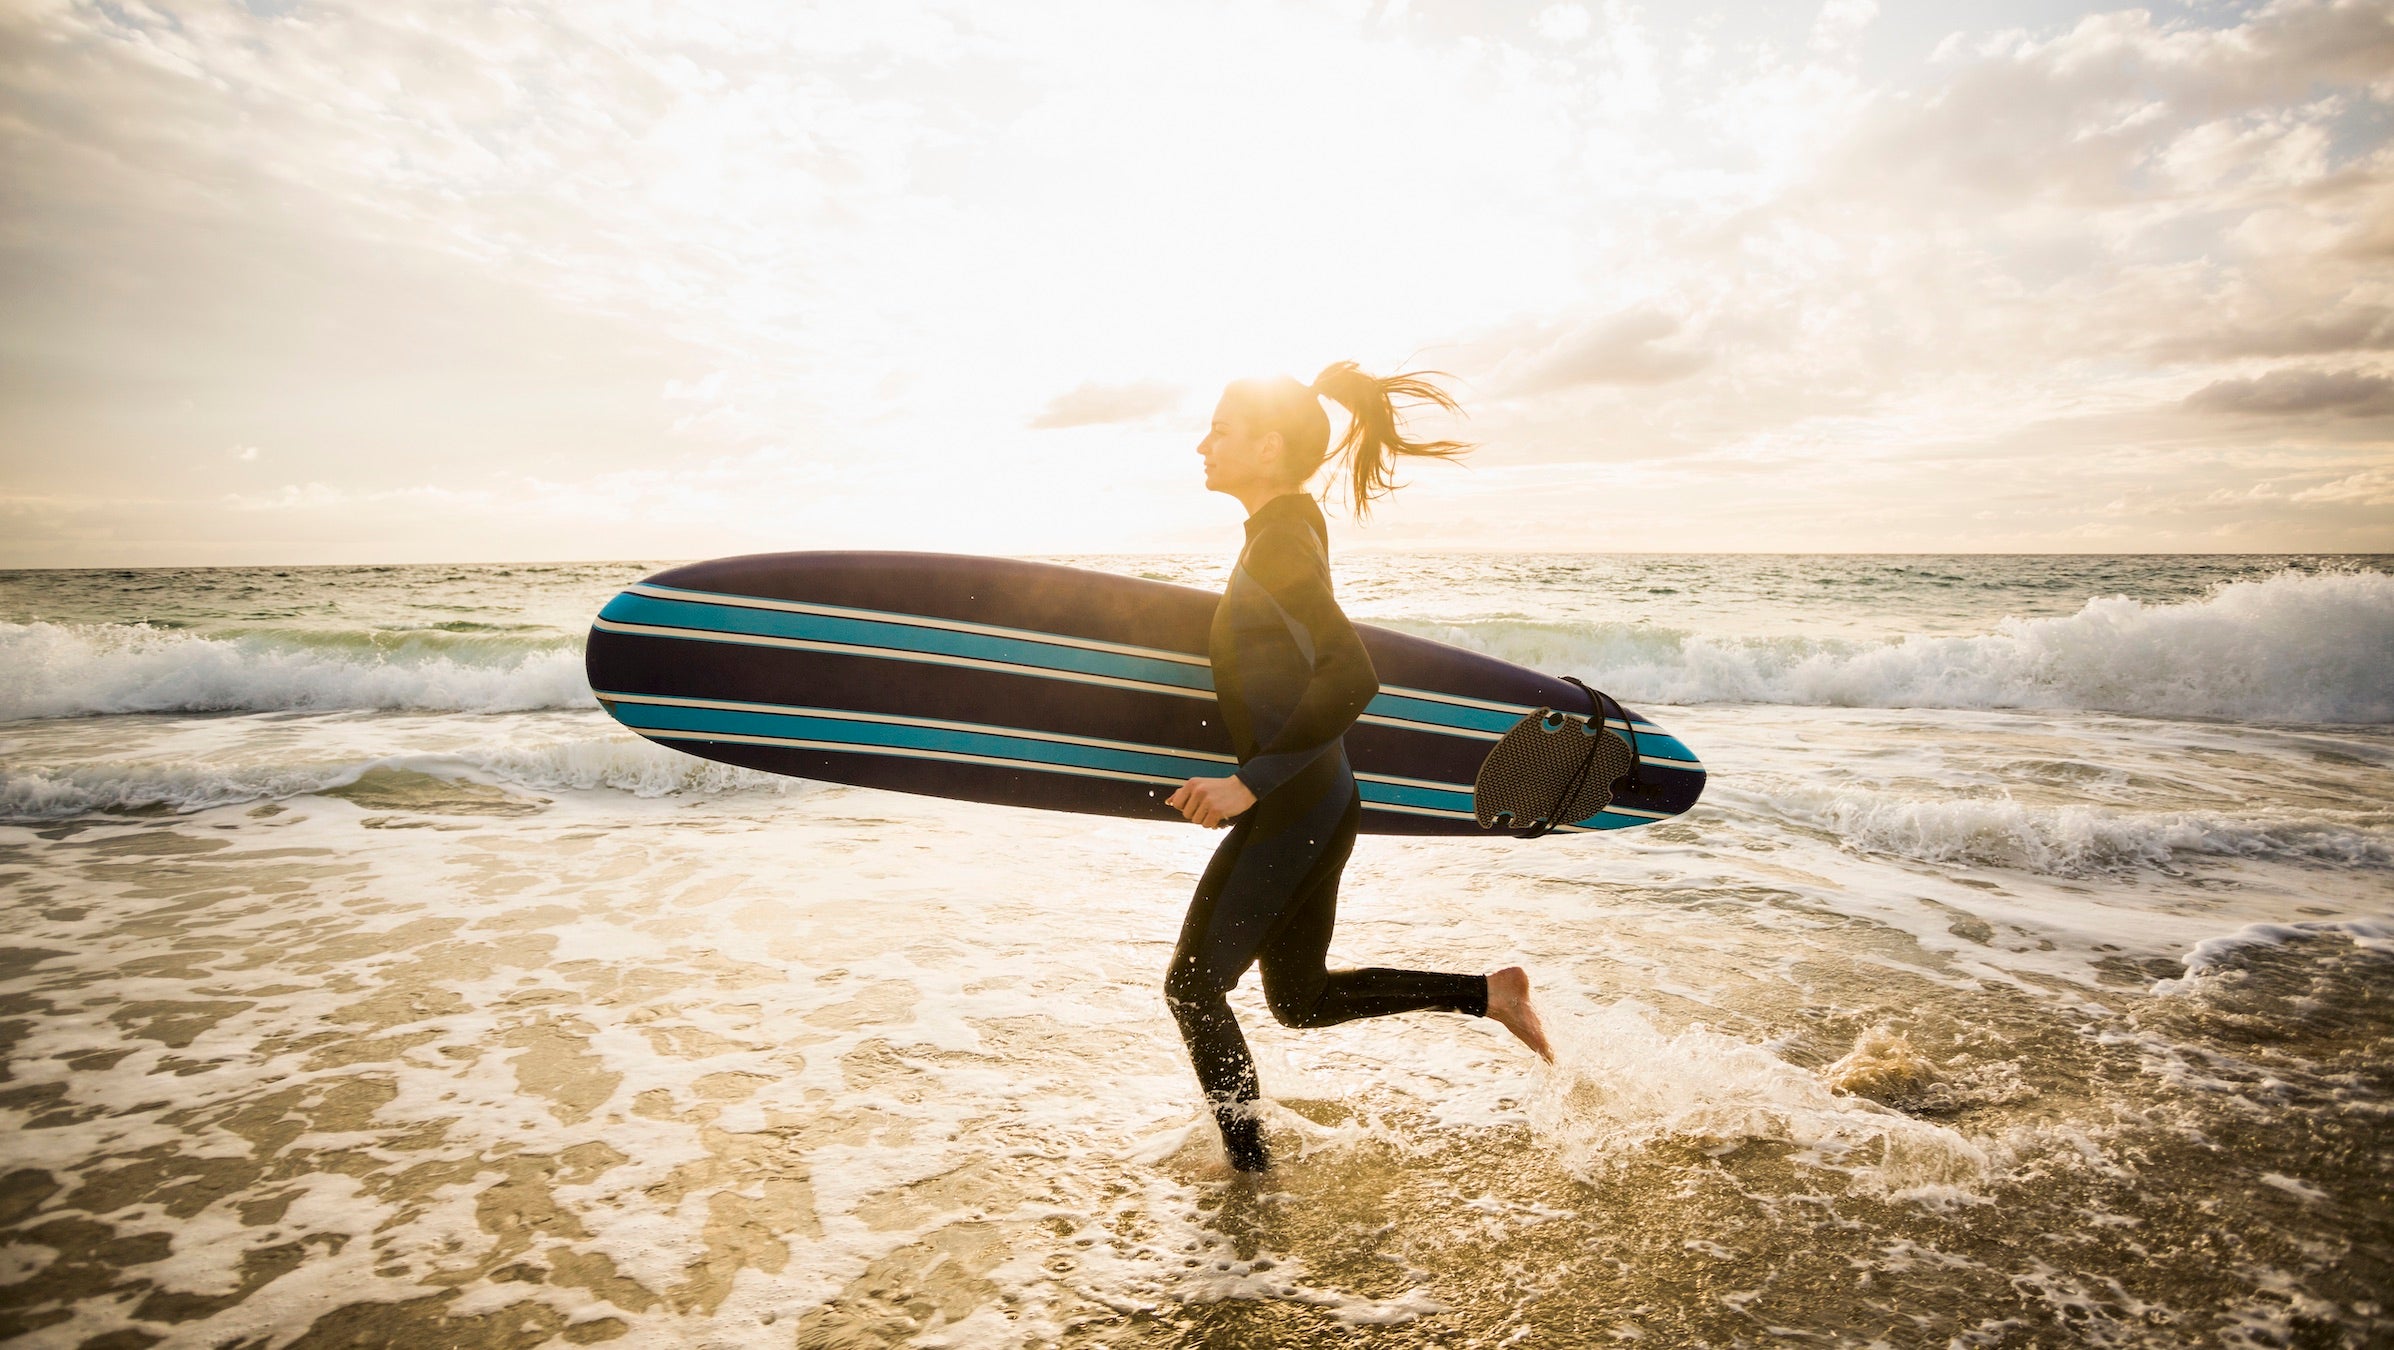 30 of the Best Surf Brands - Surfd in 2023